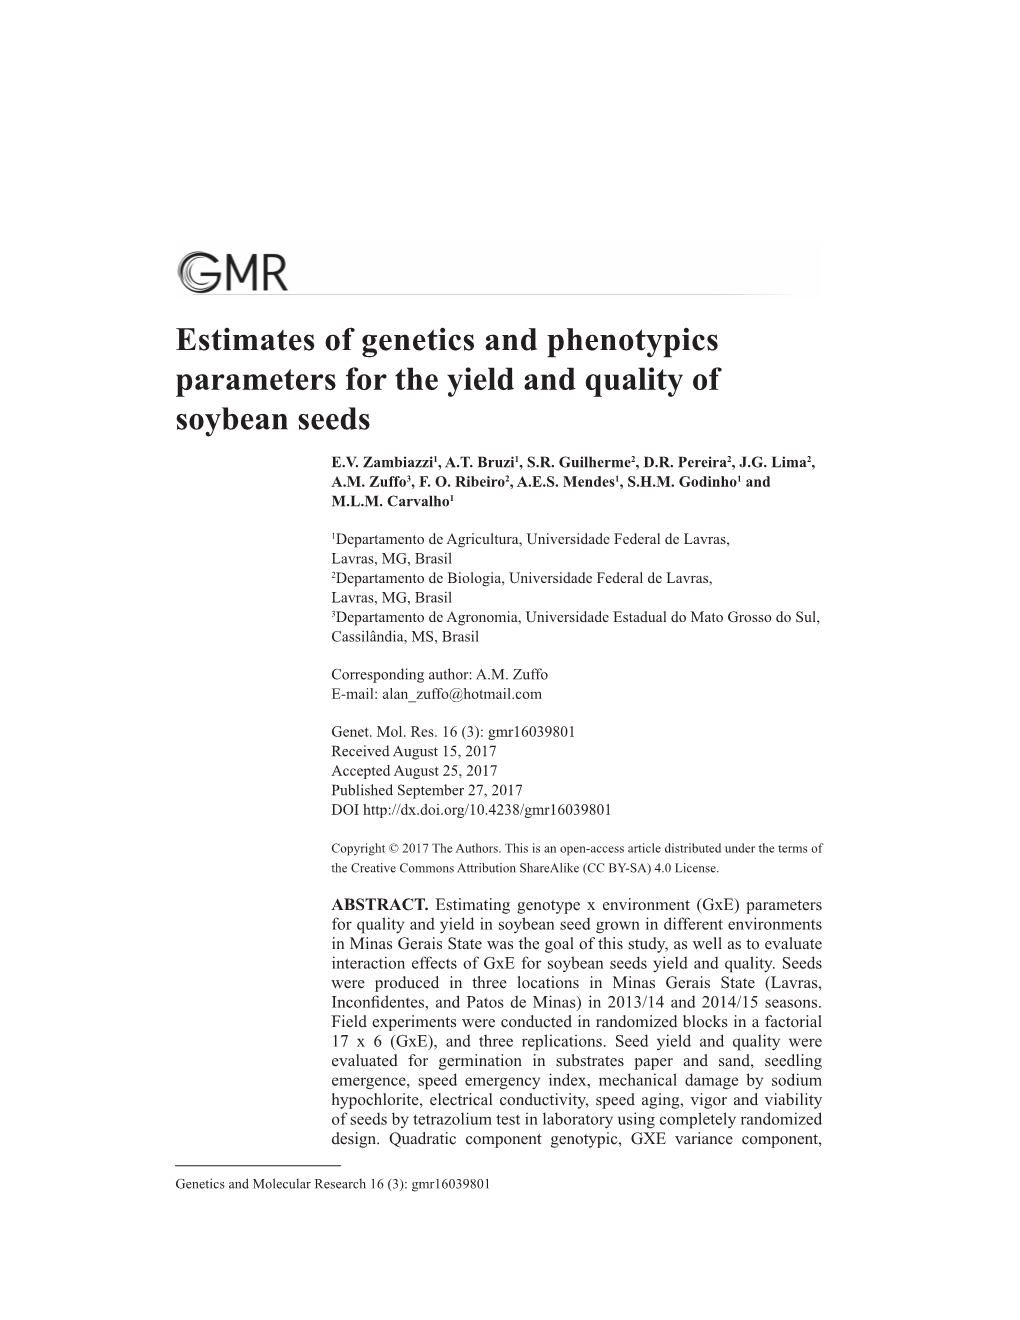 Estimates of Genetics and Phenotypics Parameters for the Yield and Quality of Soybean Seeds